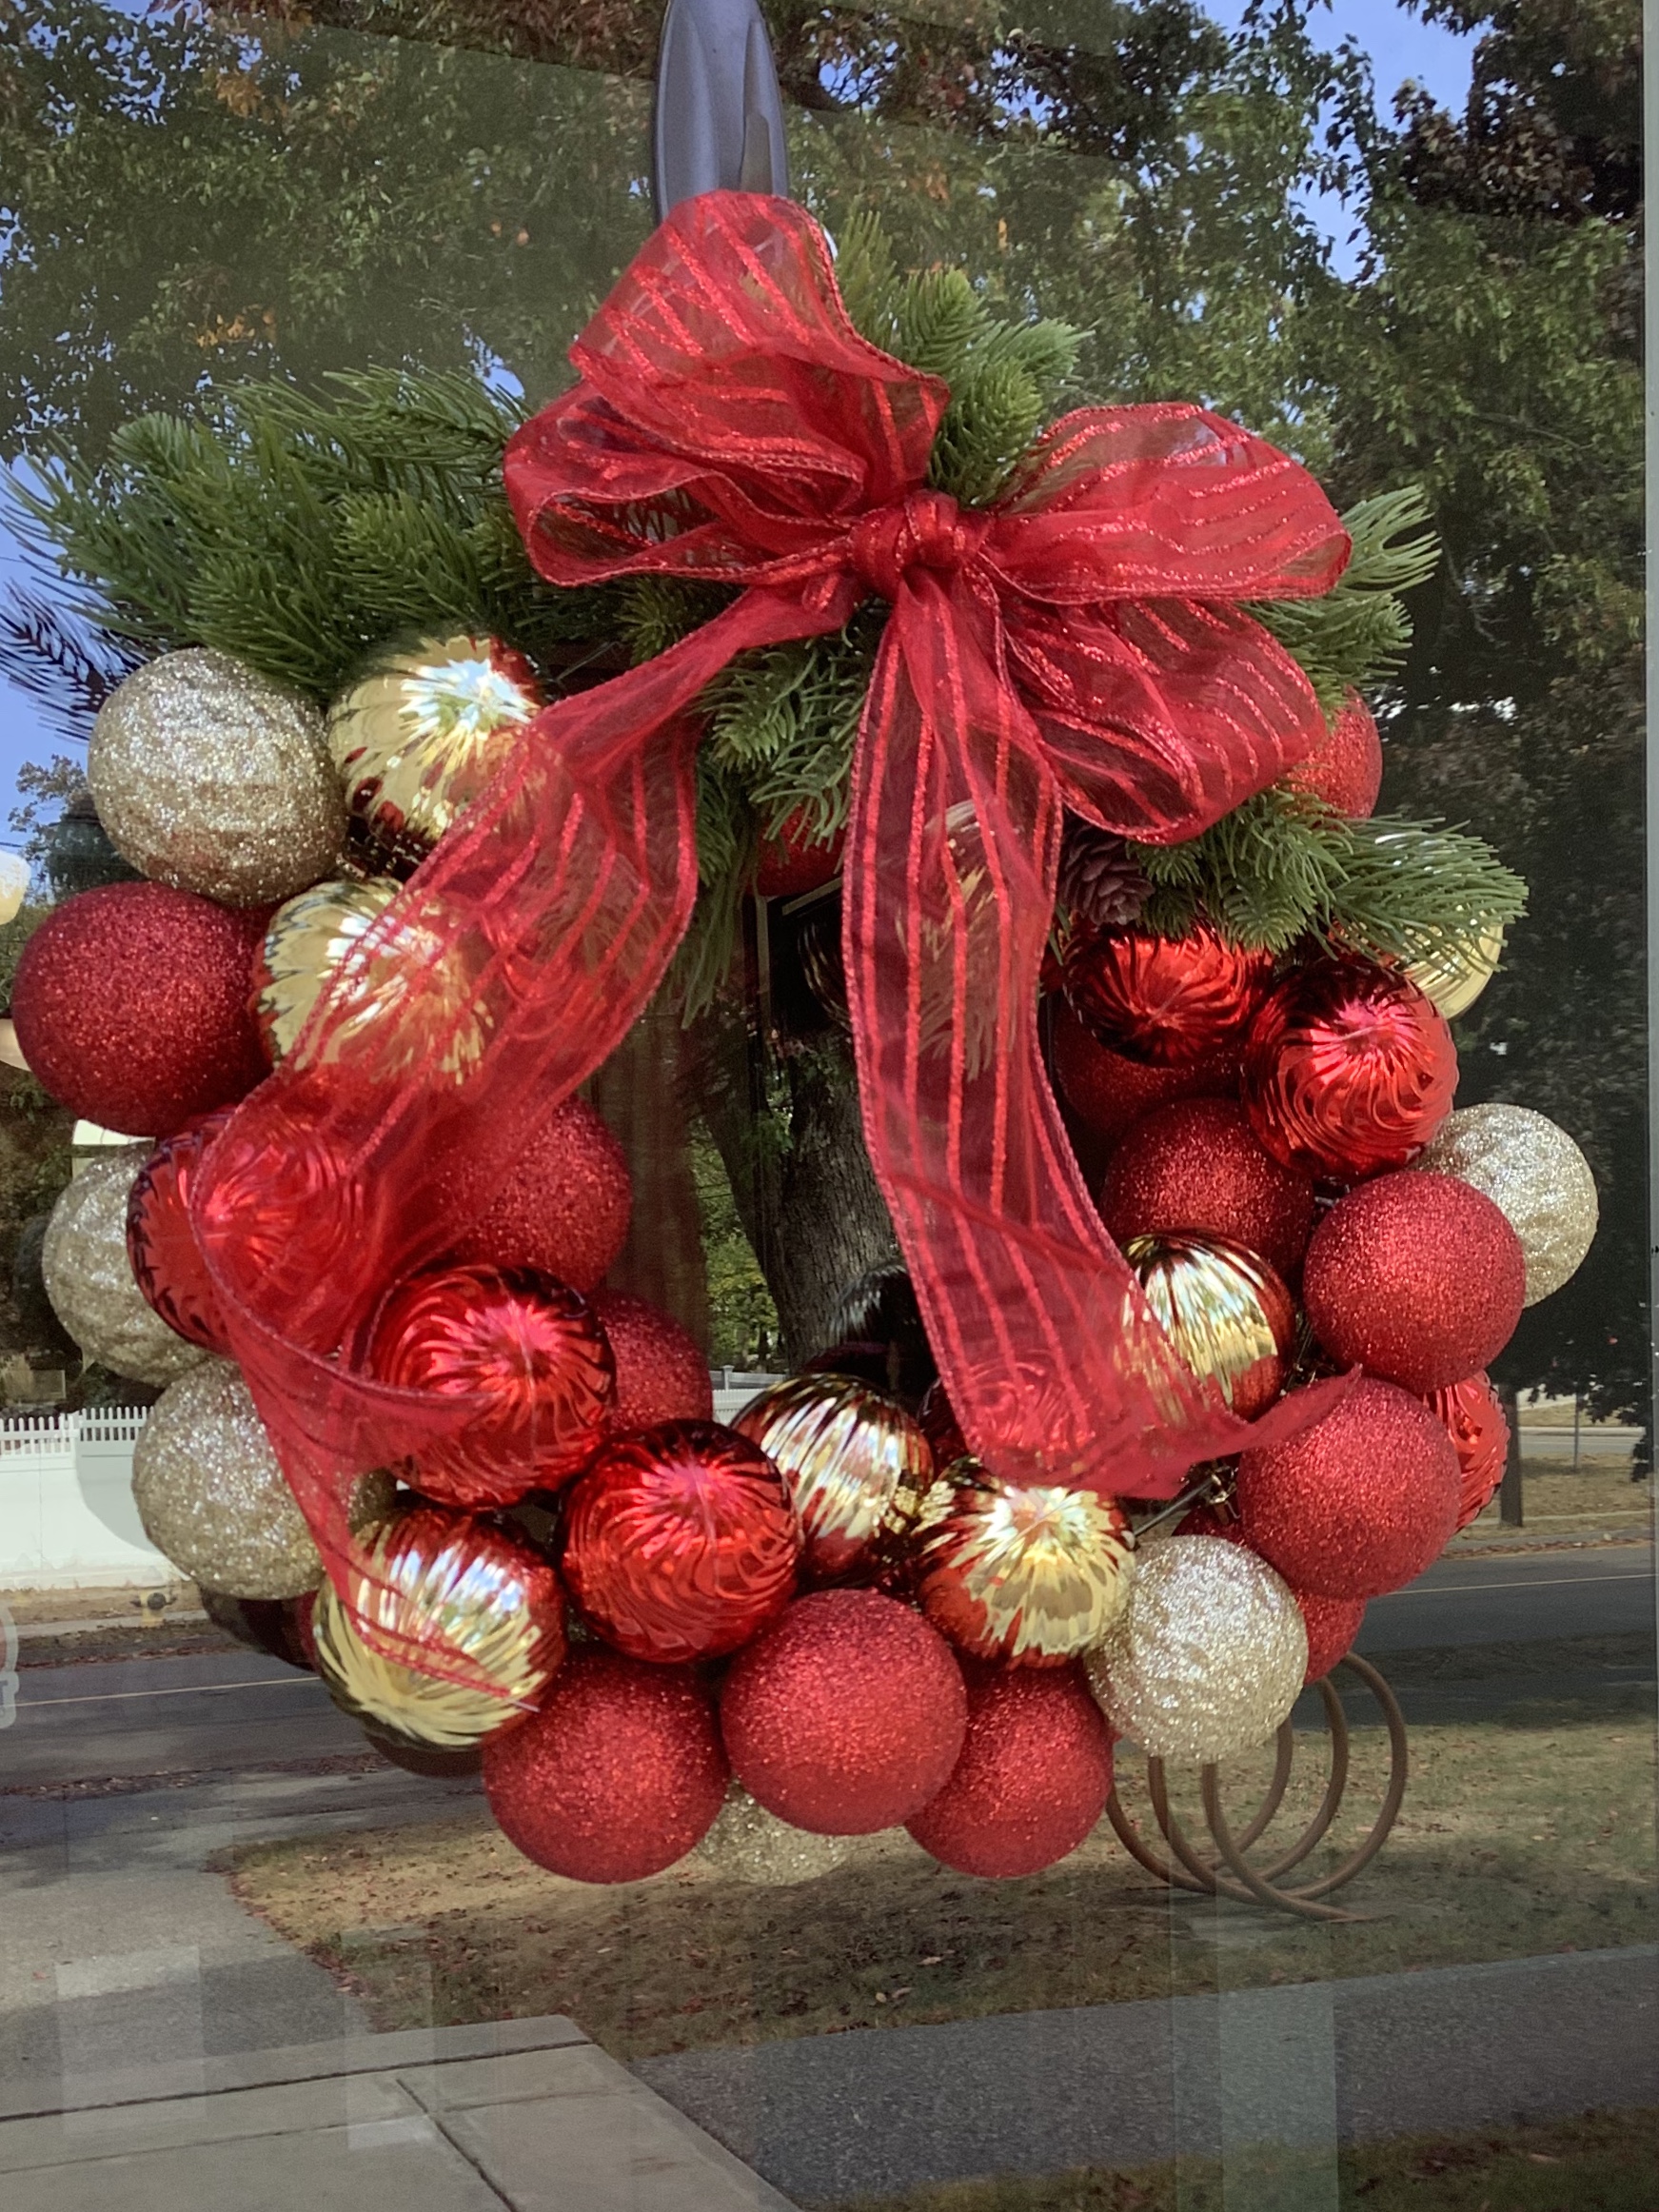 Red and gold colored ornaments fashioned into a wreath